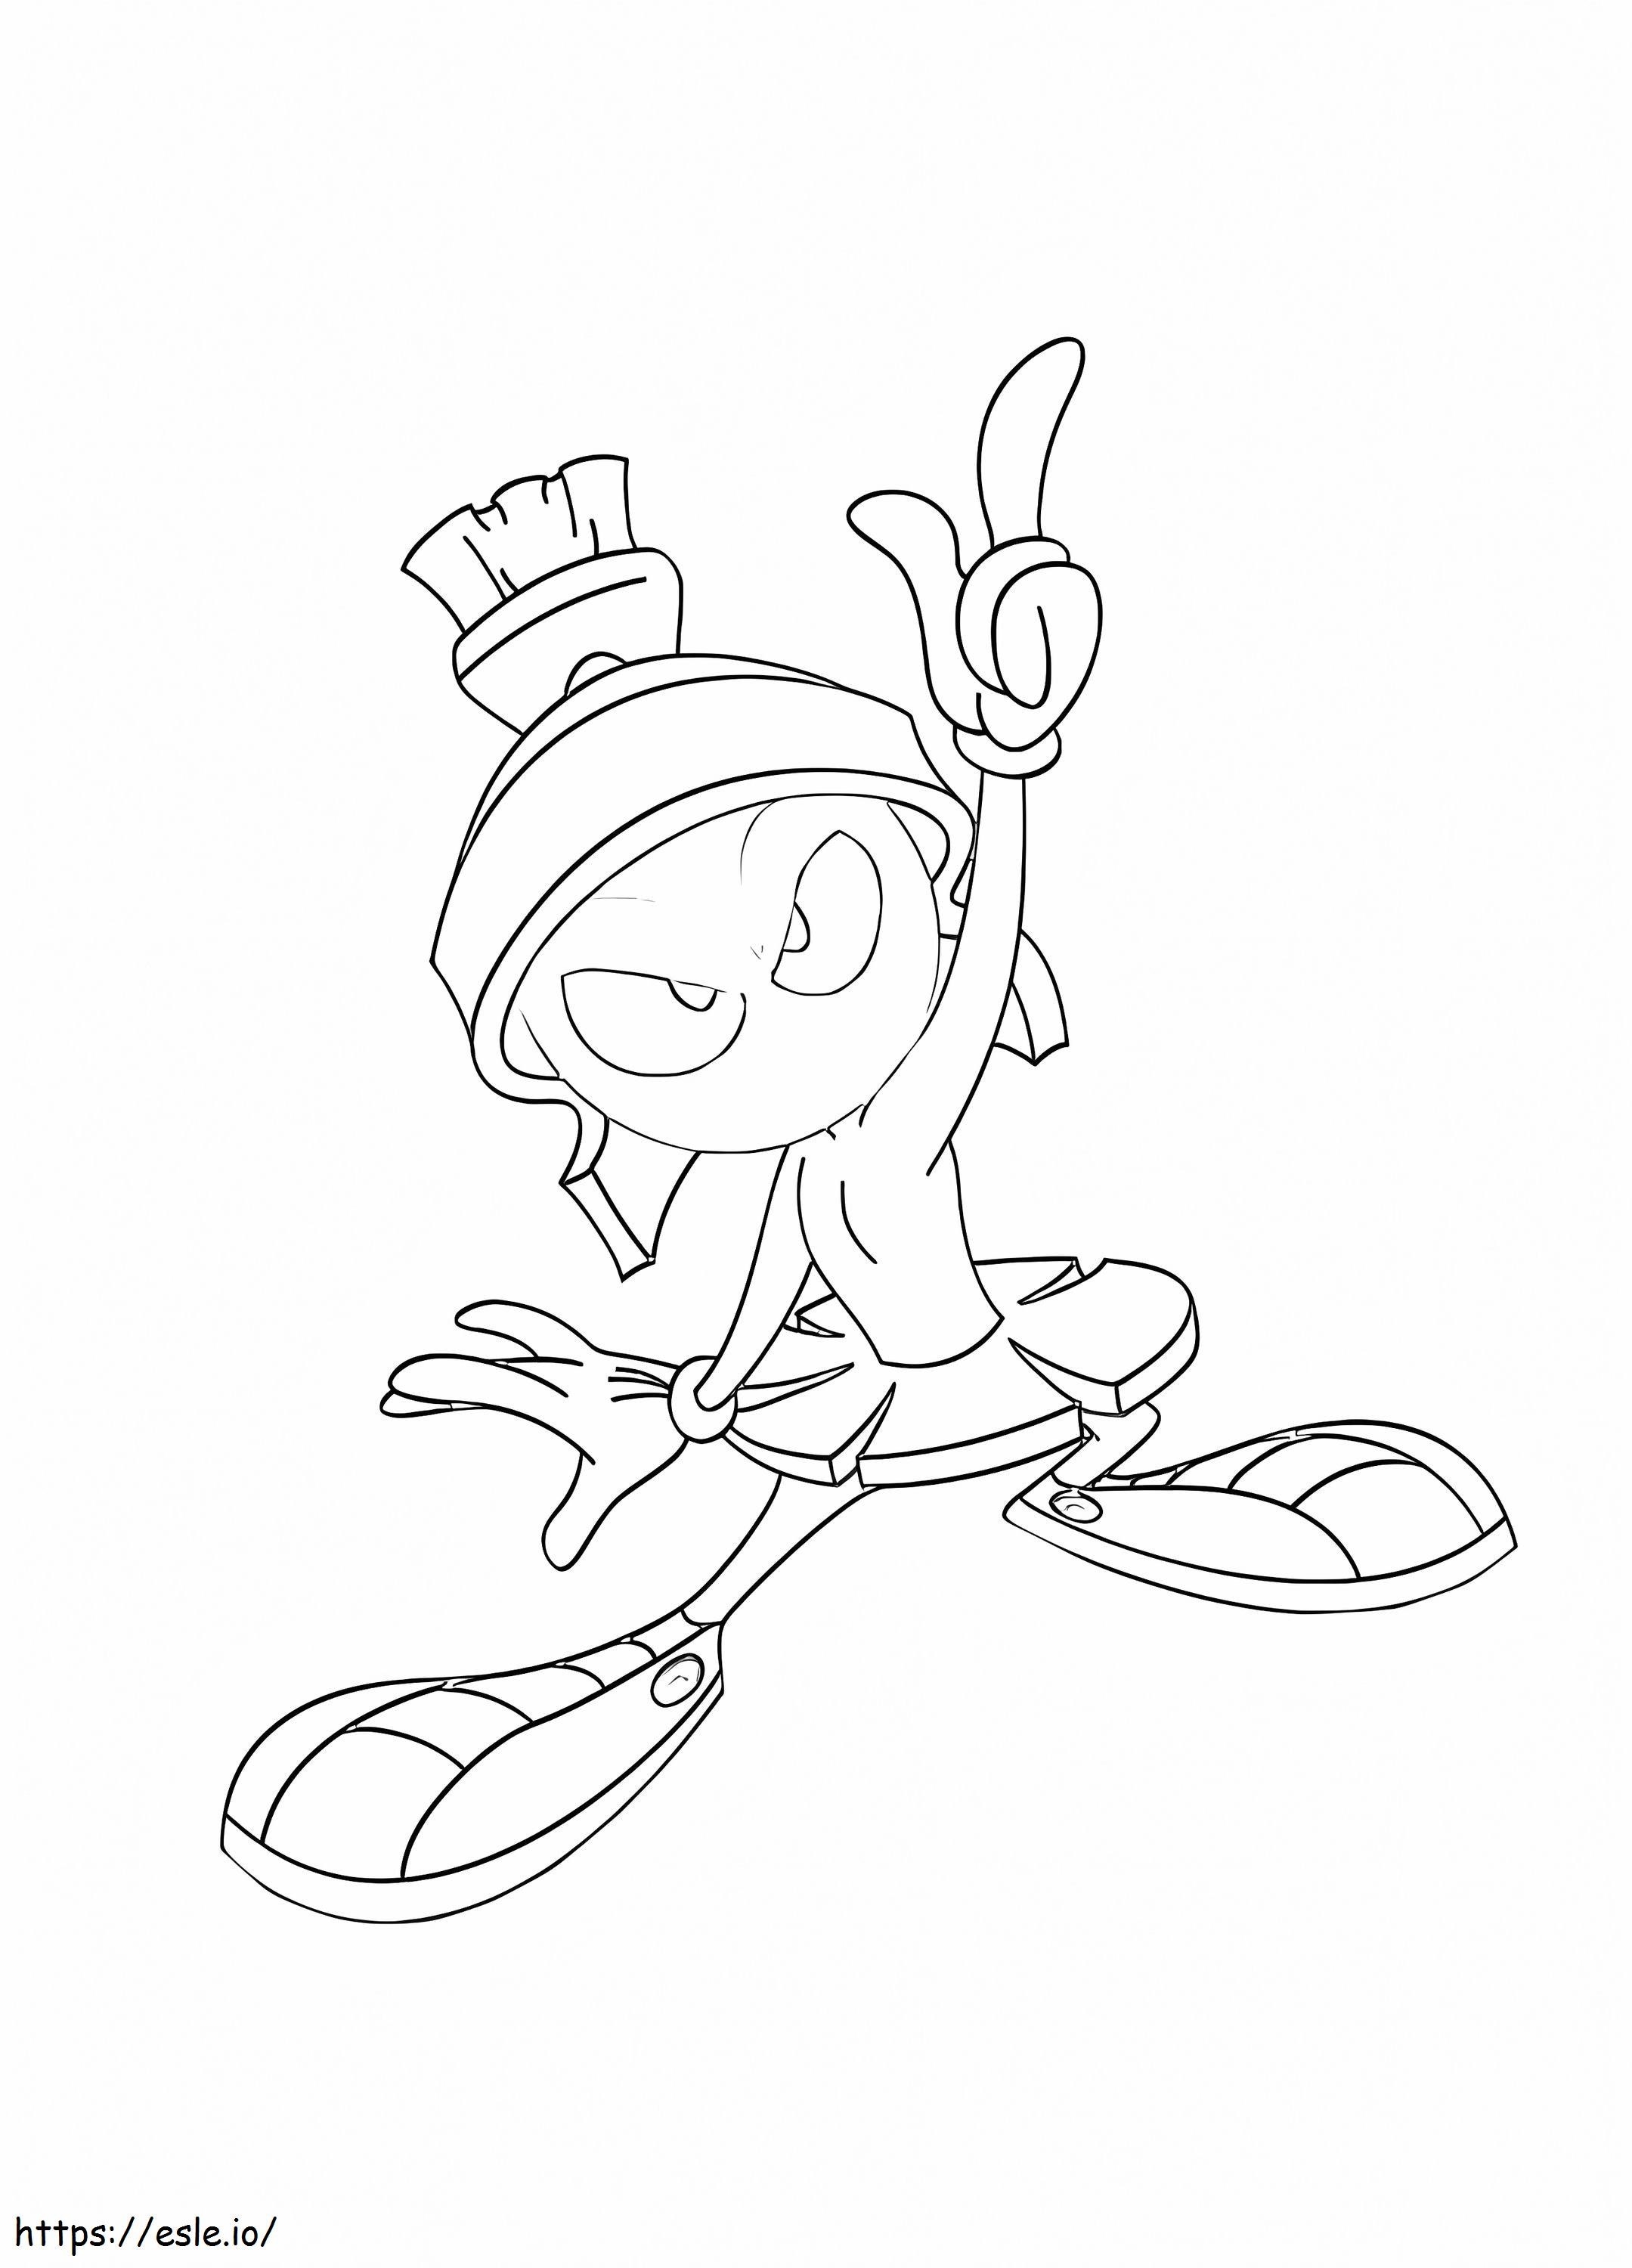 Marvin The Martian To Print coloring page